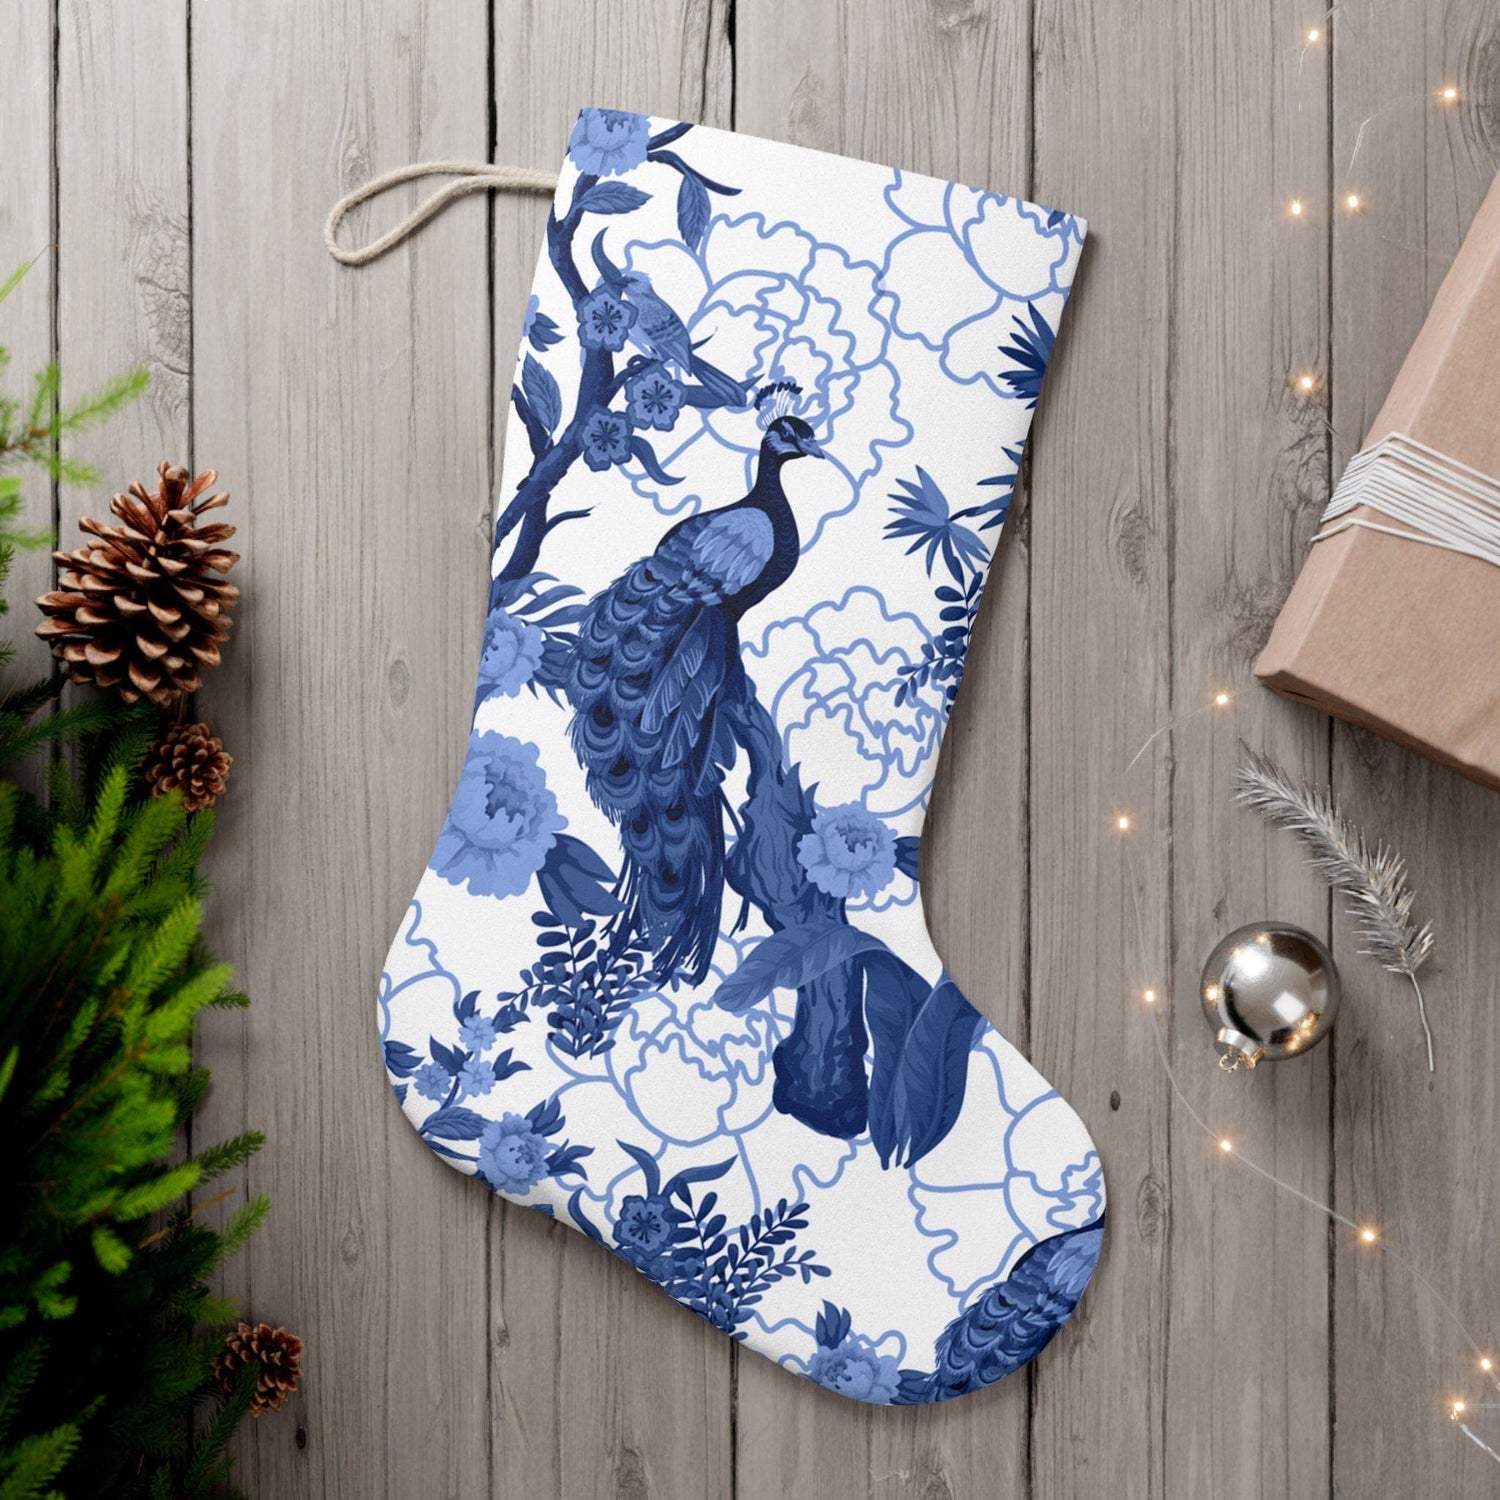 Kate McEnroe New York Chinoiserie Floral Peacock Holiday Stockings, Blue and White Botanical Toile Jungle Motifs Christmas Mantle DecorationHoliday Stockings15899367389009277432